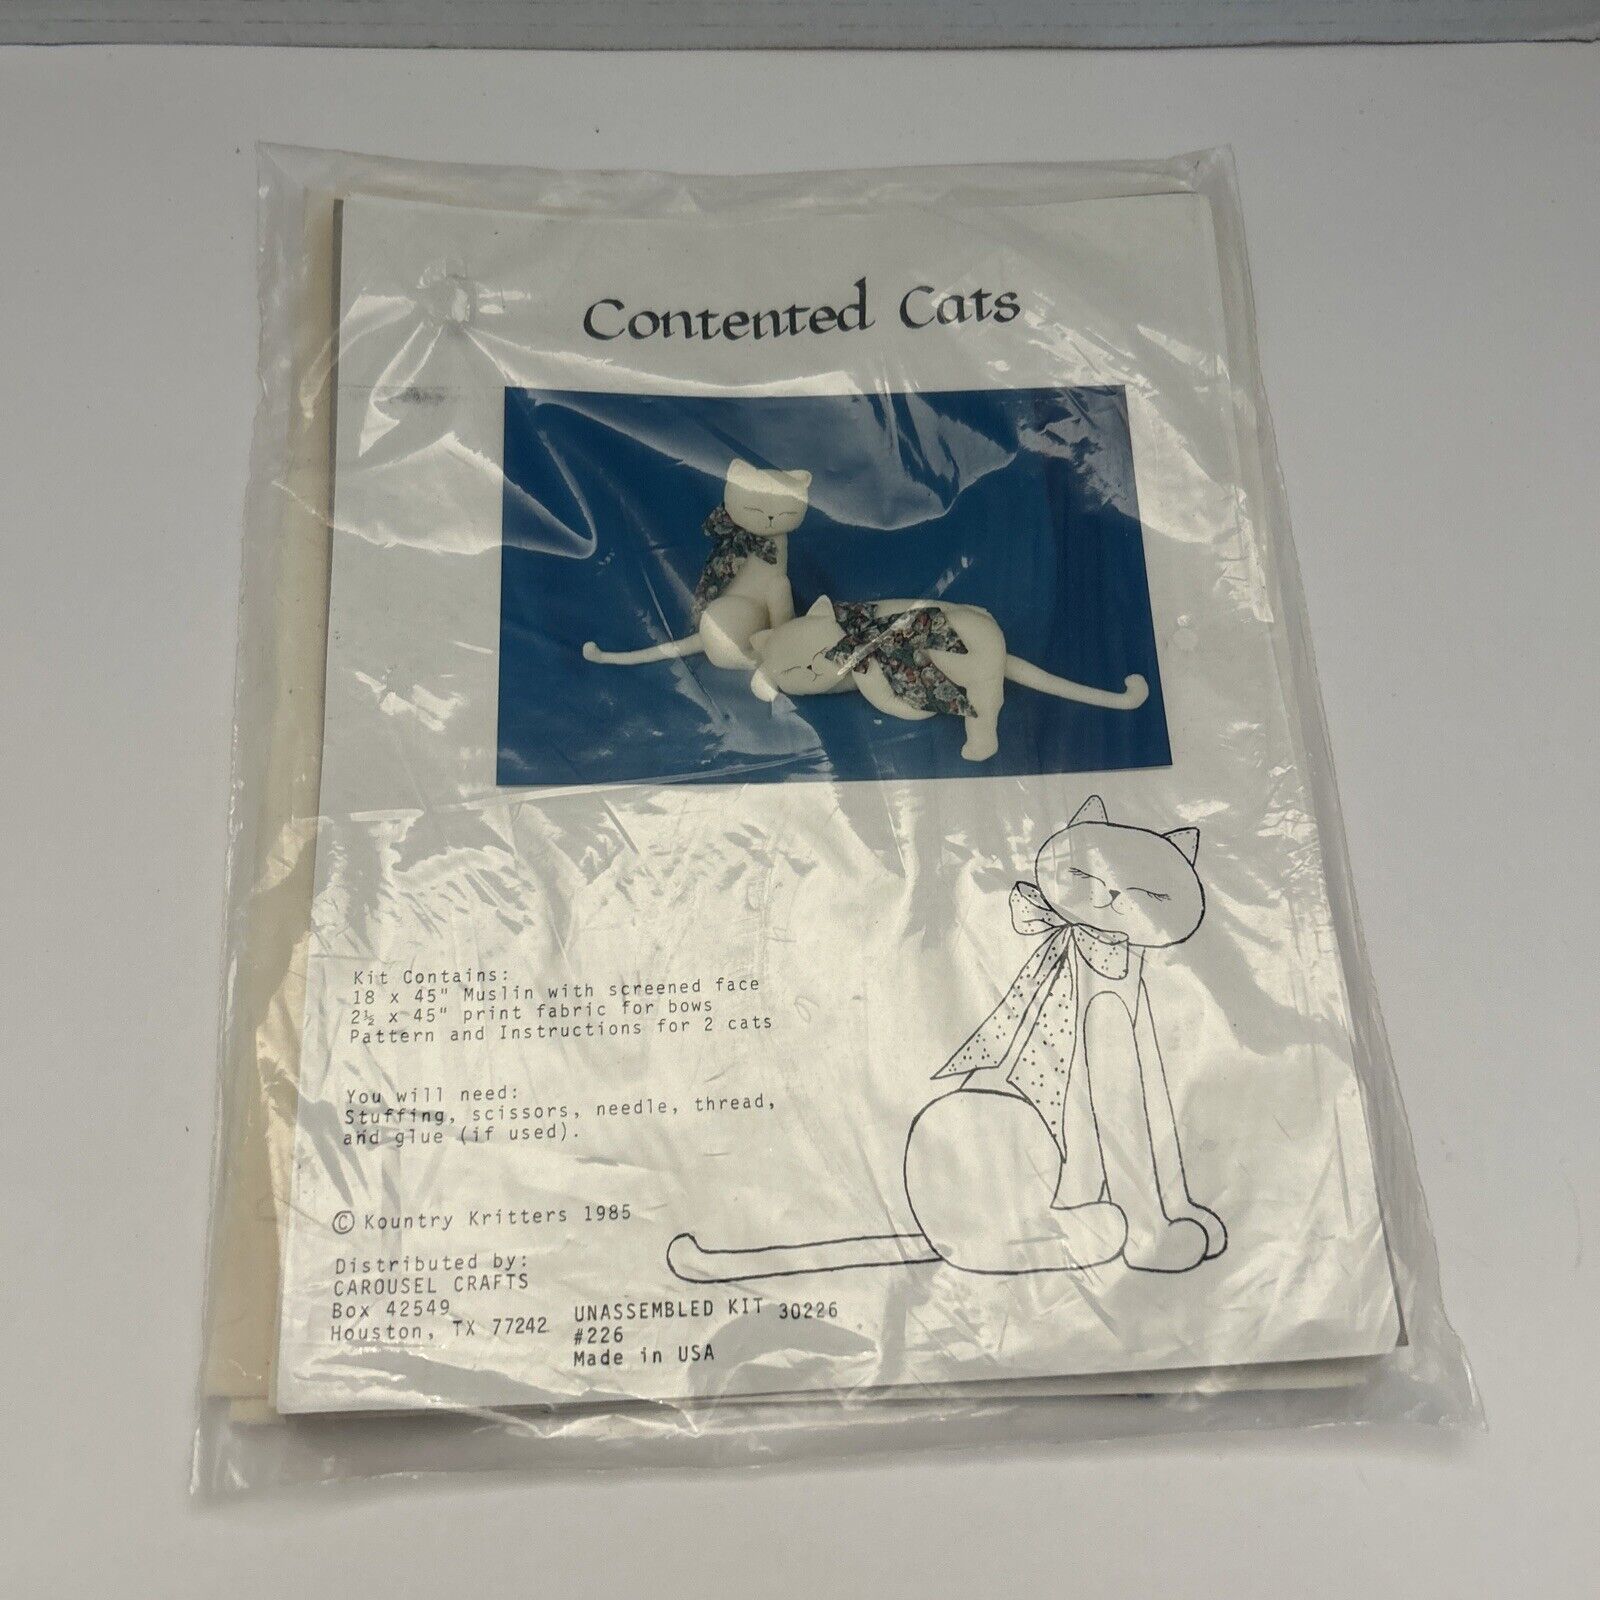 NOS 1985 Contented Cats Craft Sewing Project Kit New Unopened Carousel Crafts ￼